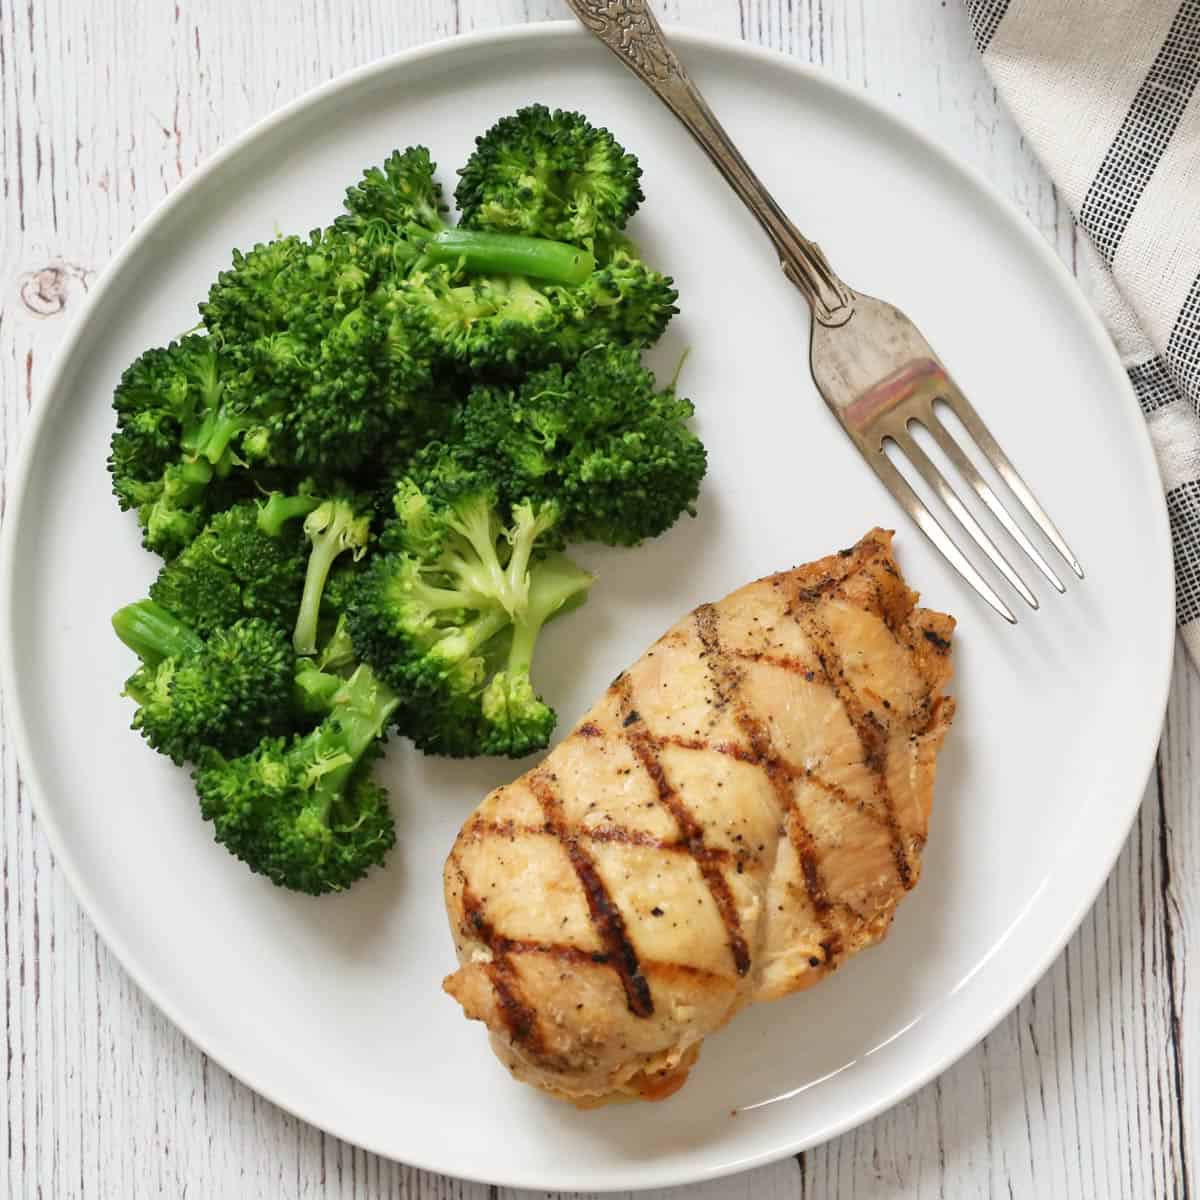 Microwave broccoli is served with grilled chicken breast.